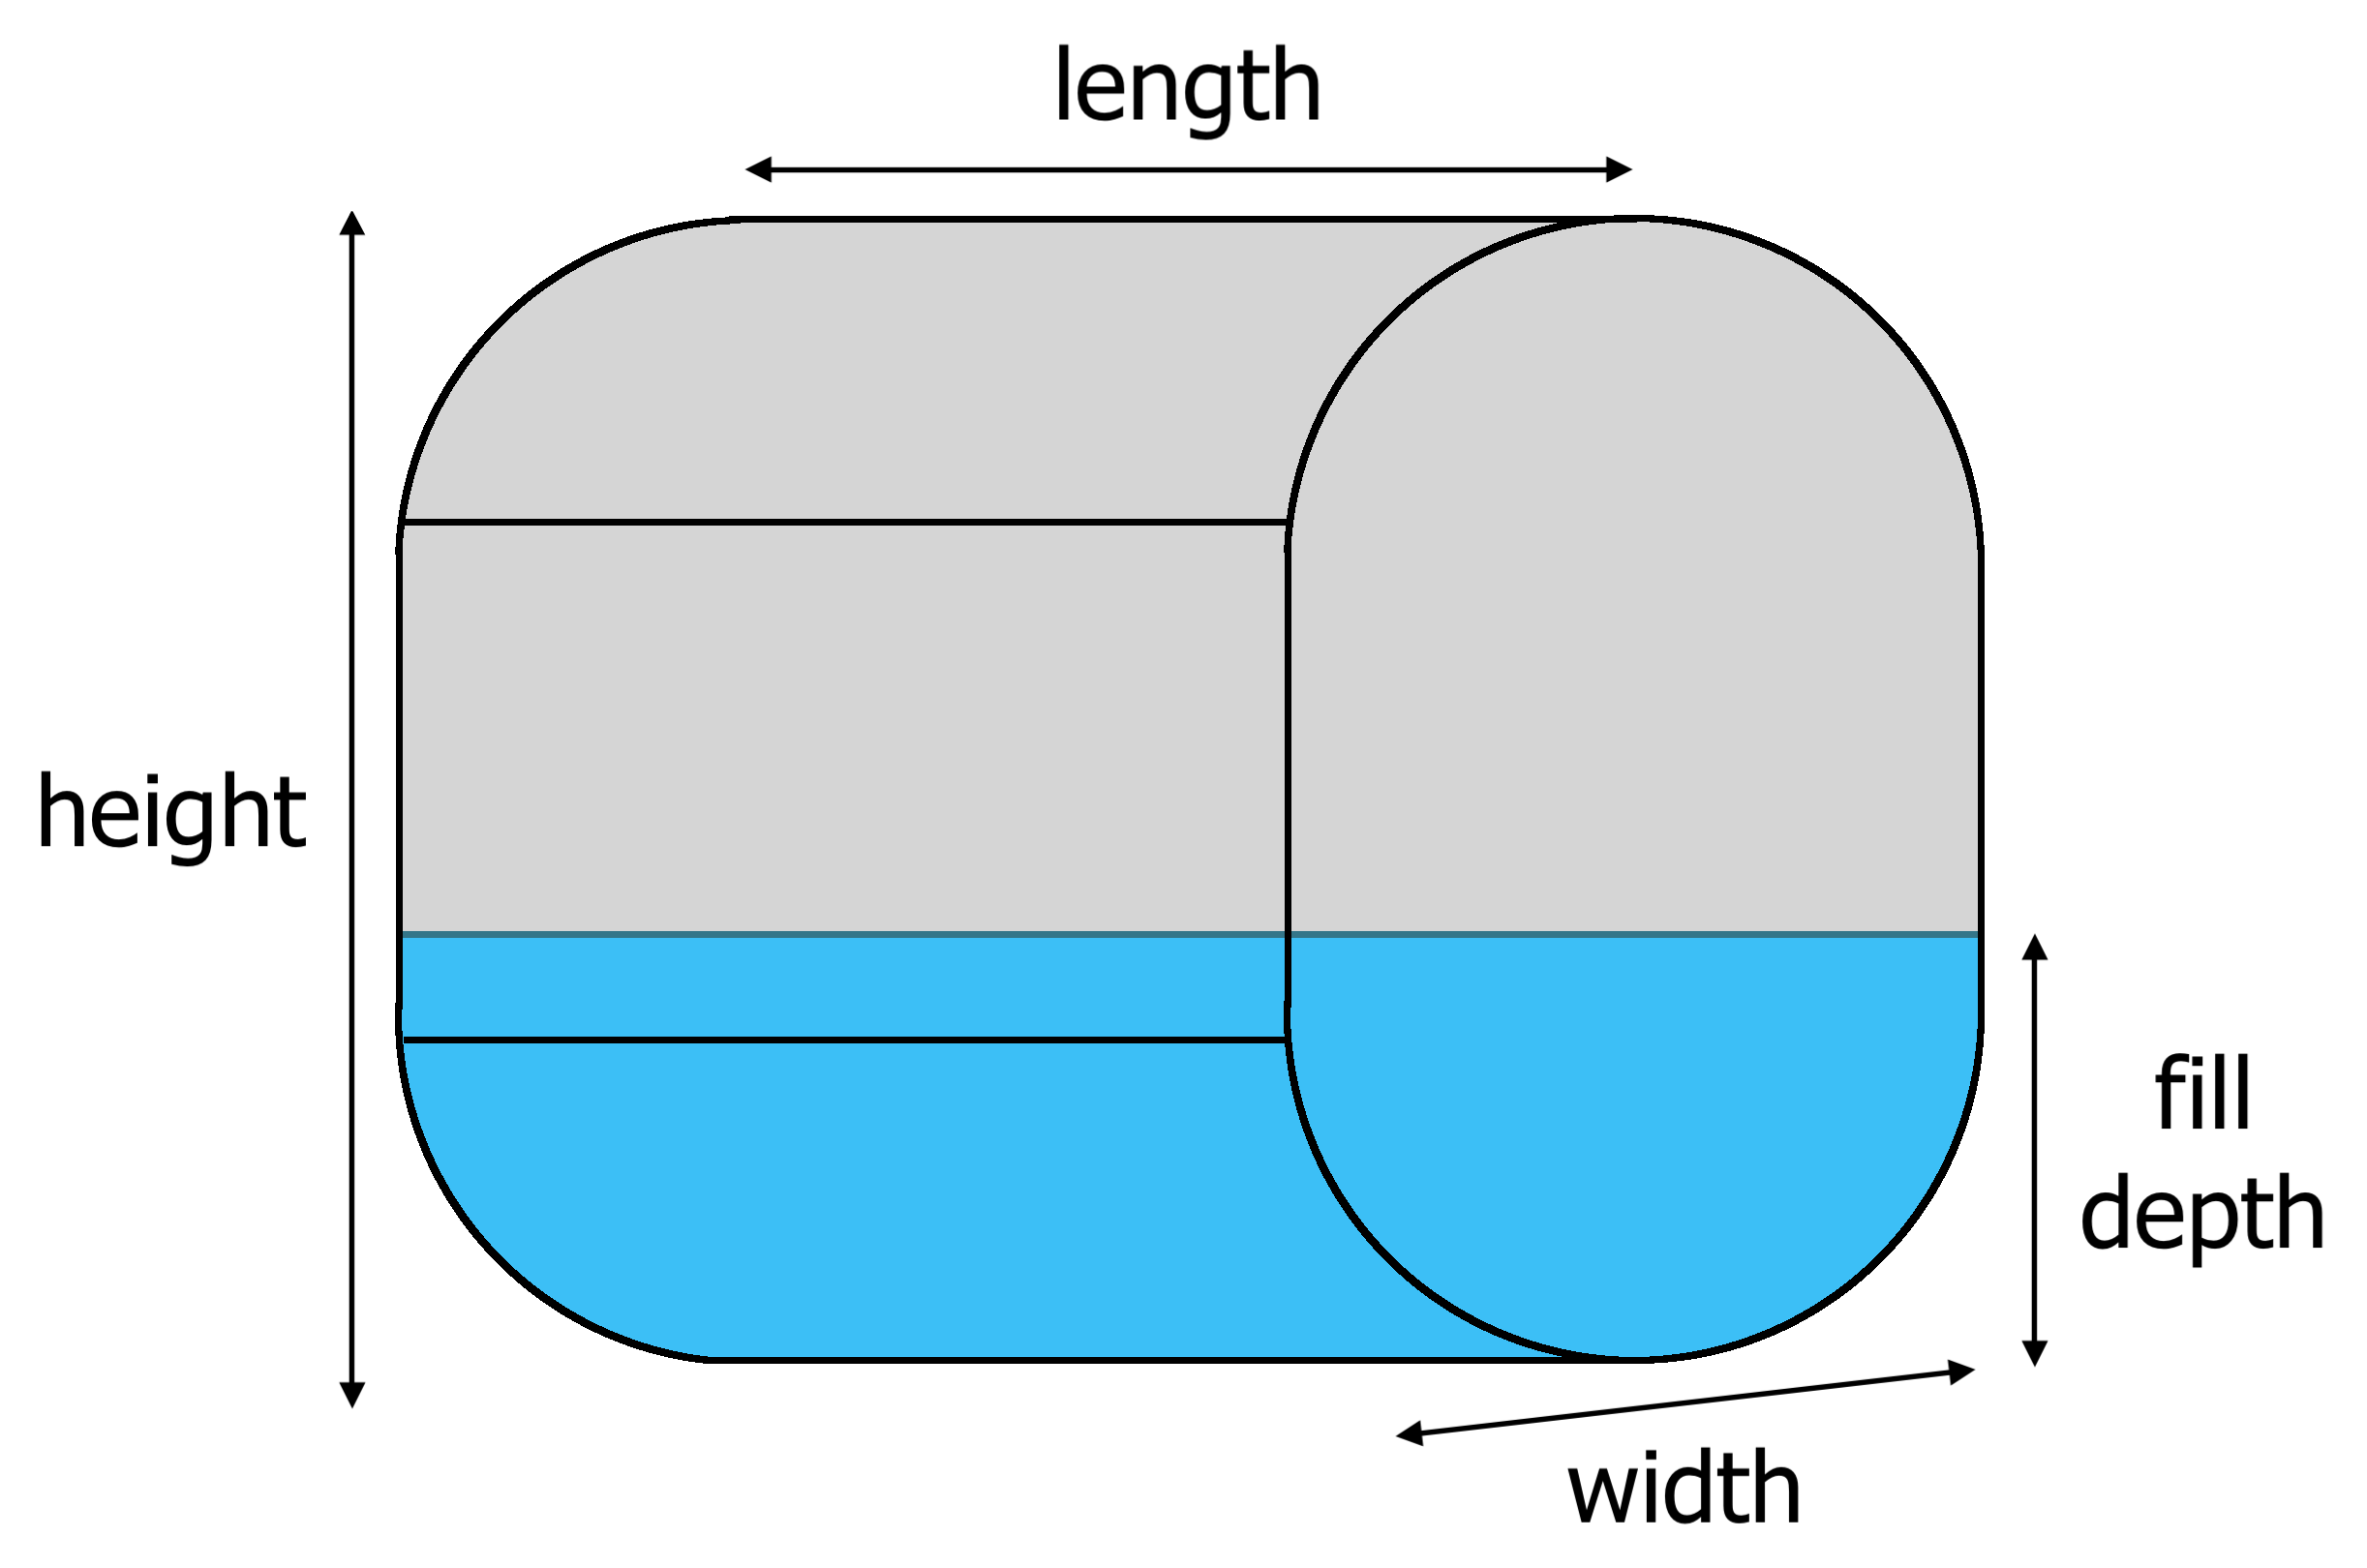 vertical oval tank diagram showing length, width, height, and fill depth dimensions